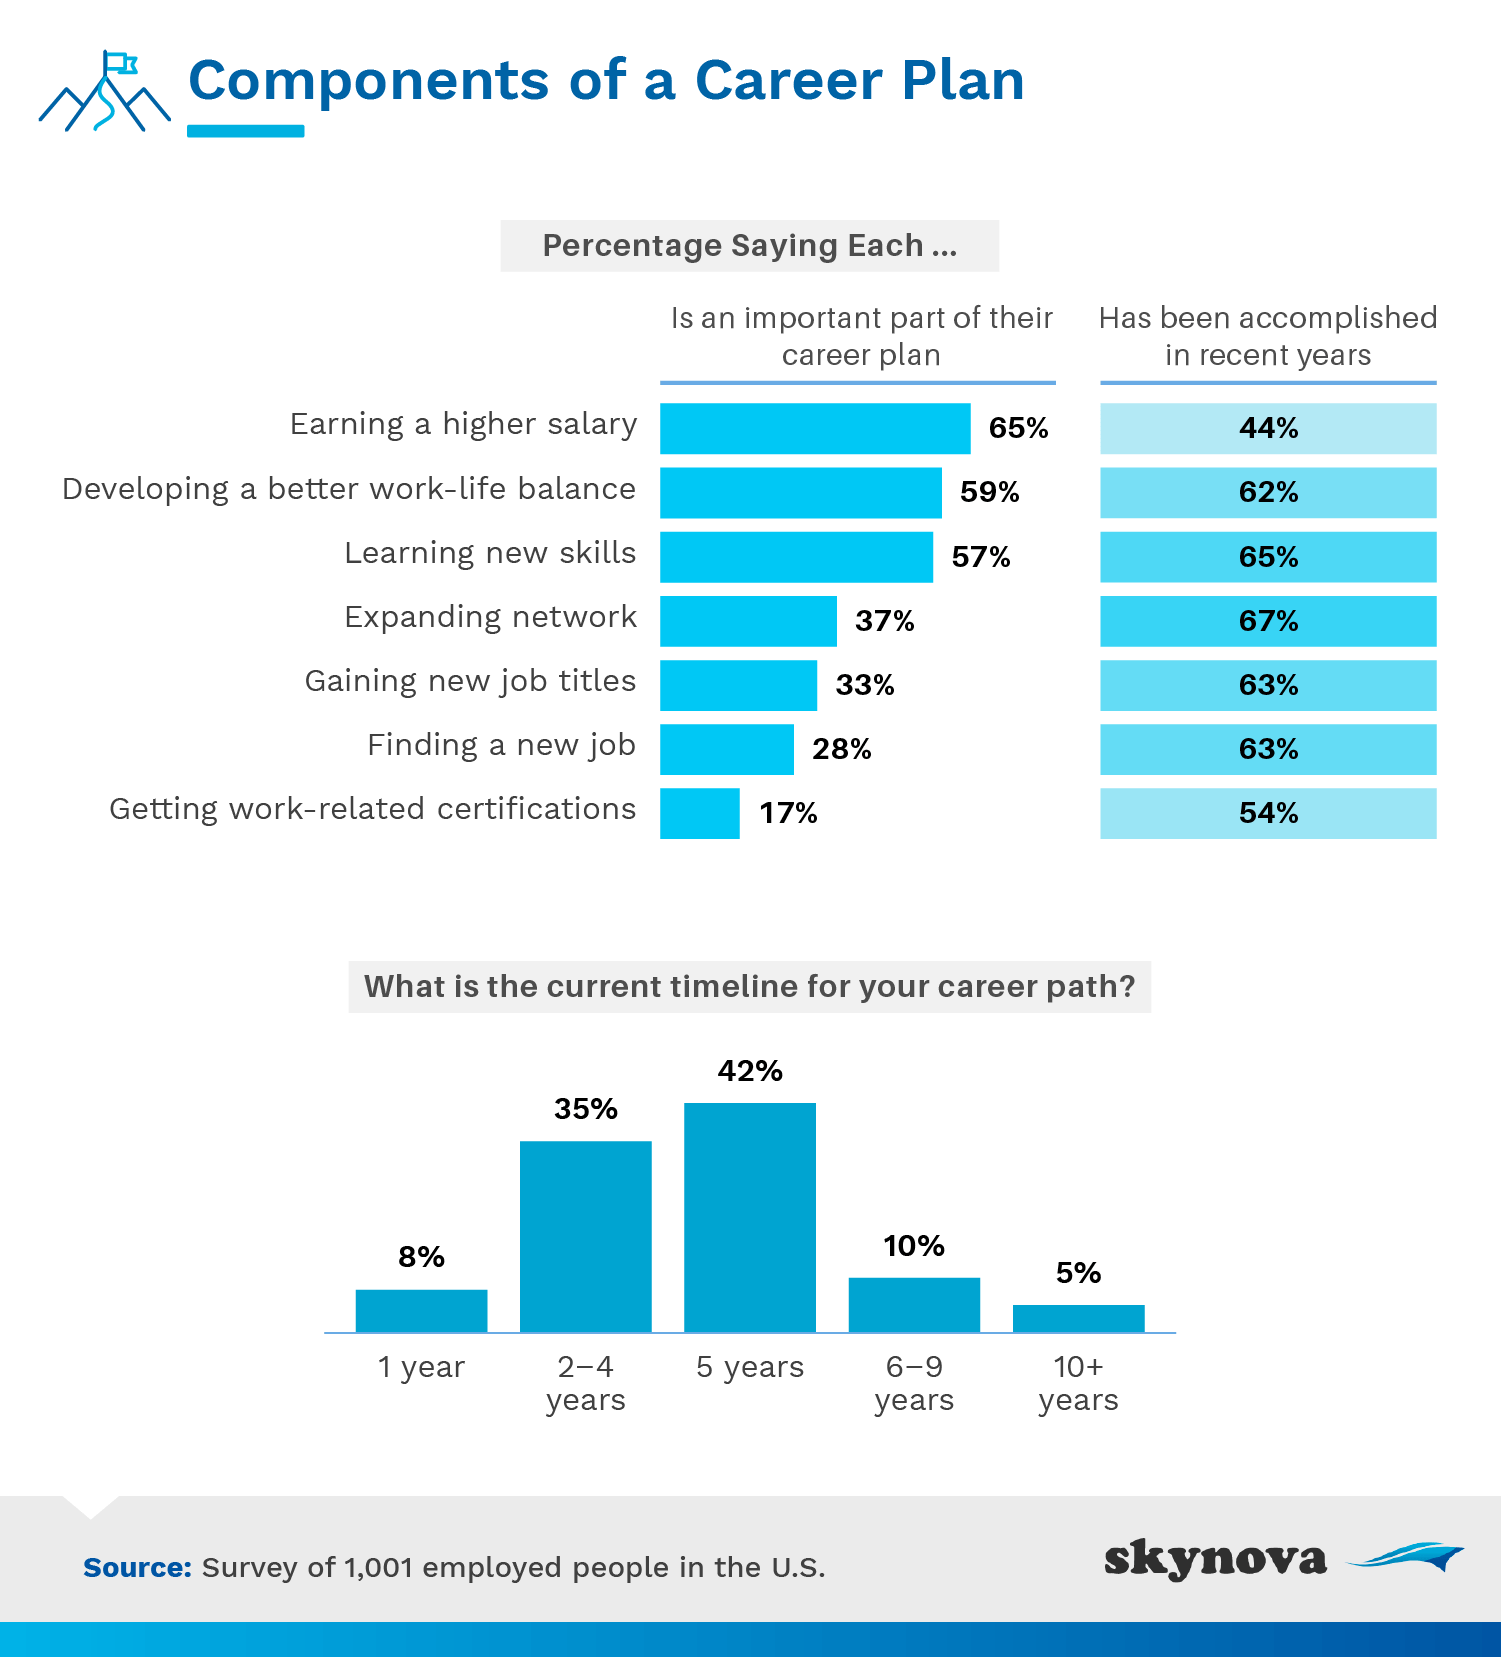 Components of a career plan